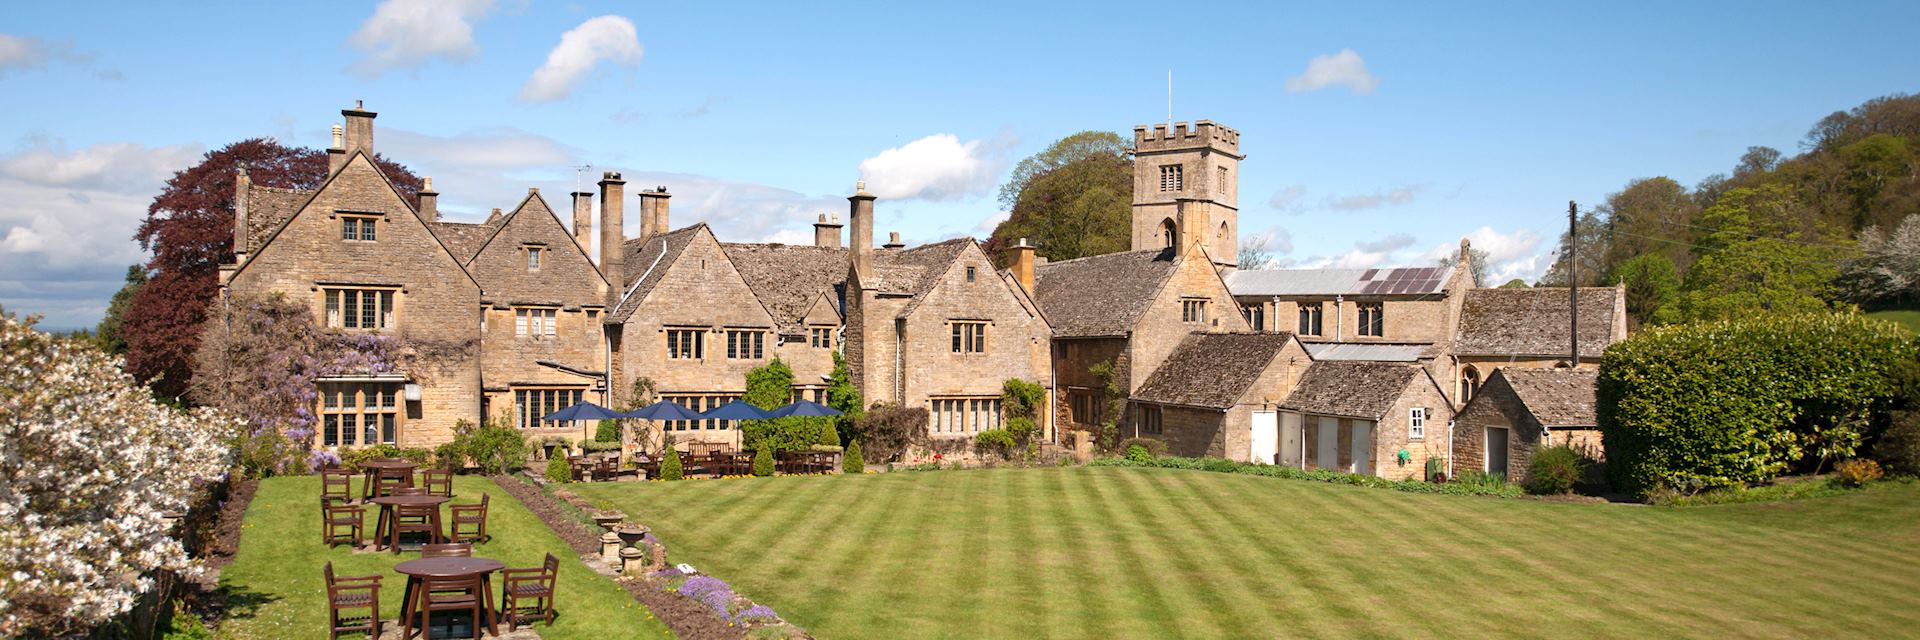 Buckland Manor, Cotswolds